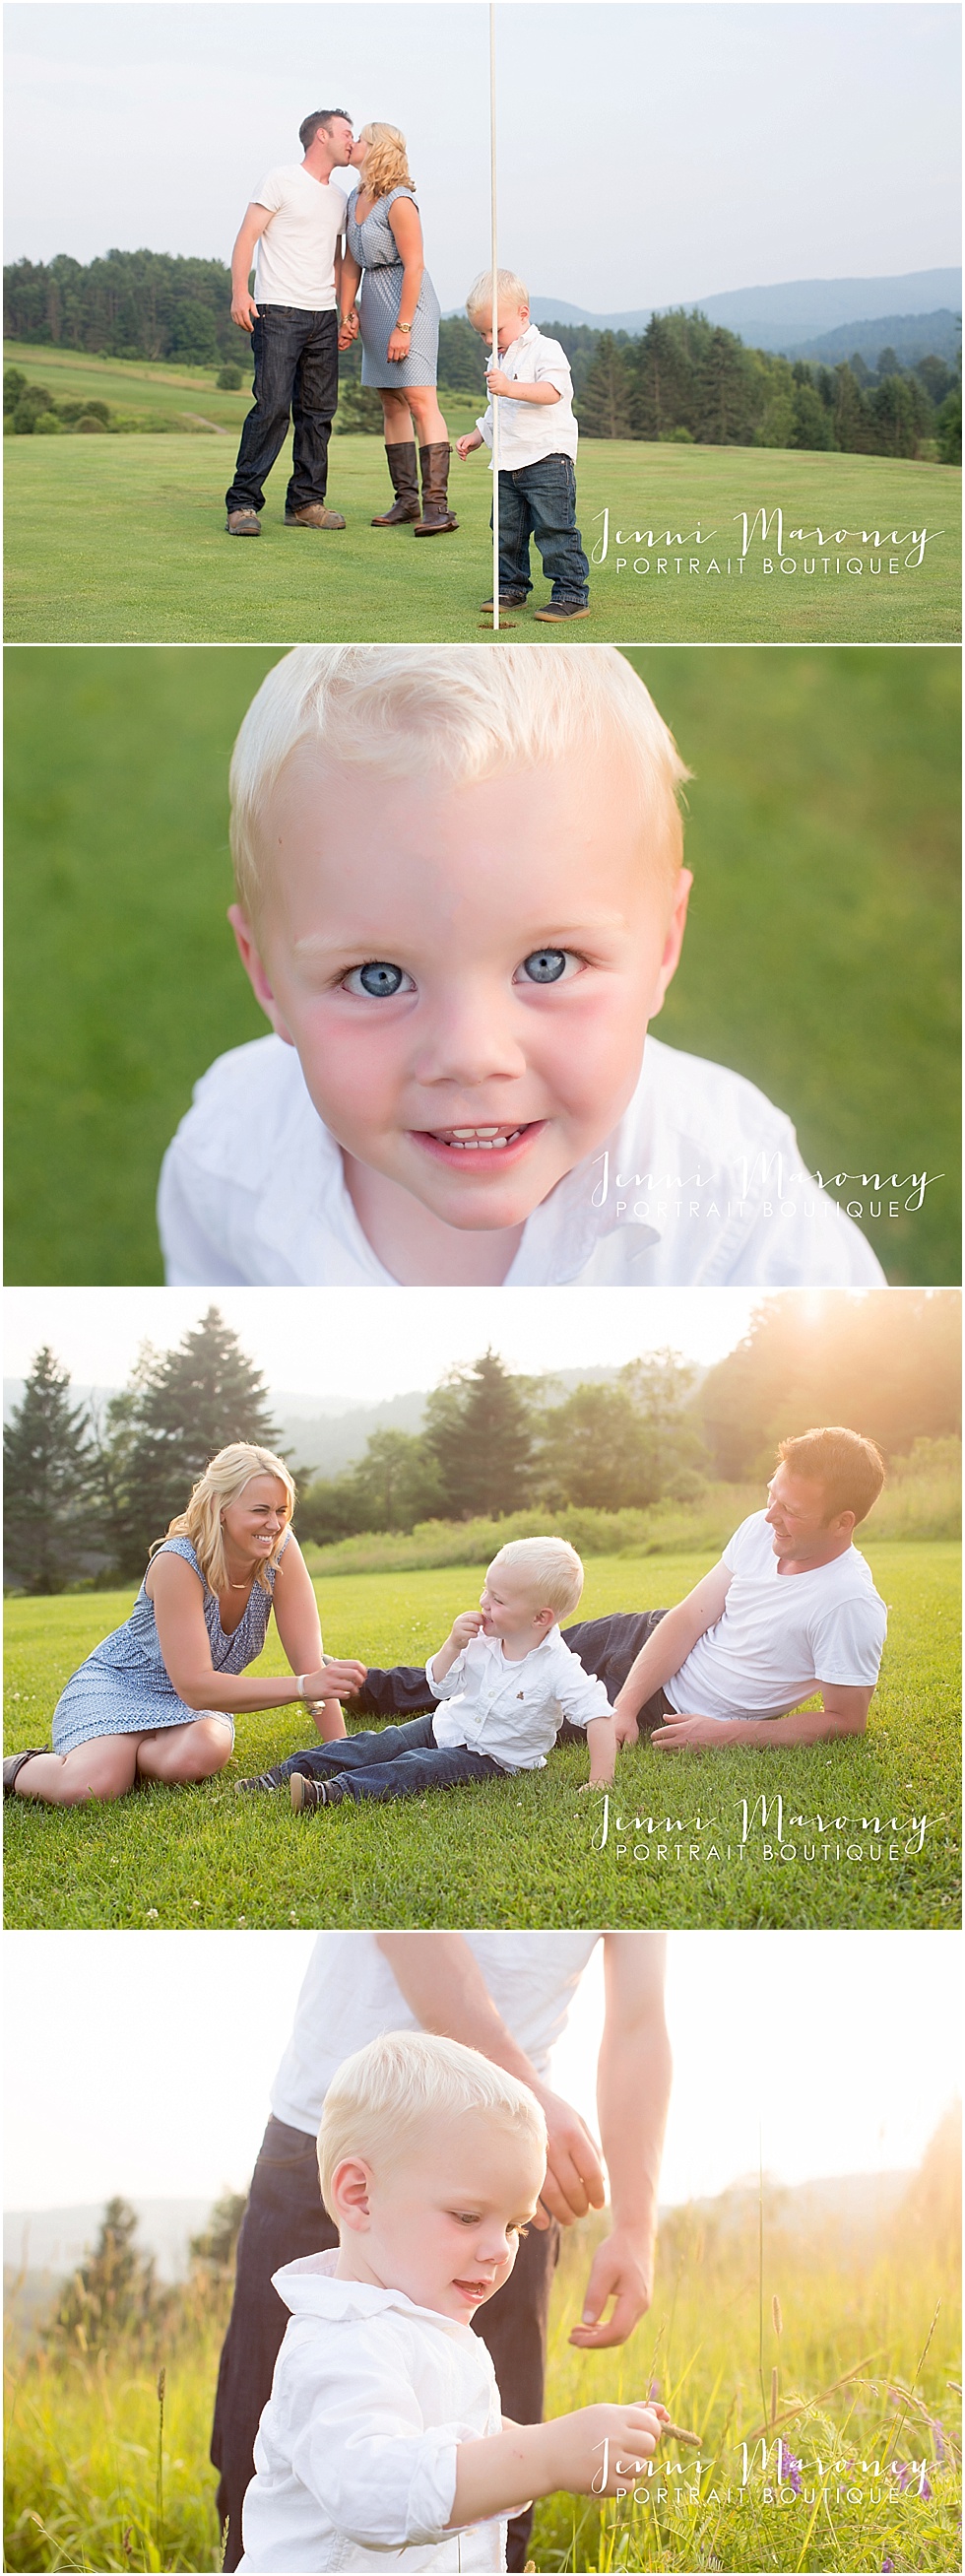 family photos outside on golf course at sunset with family photographer jenni maroney